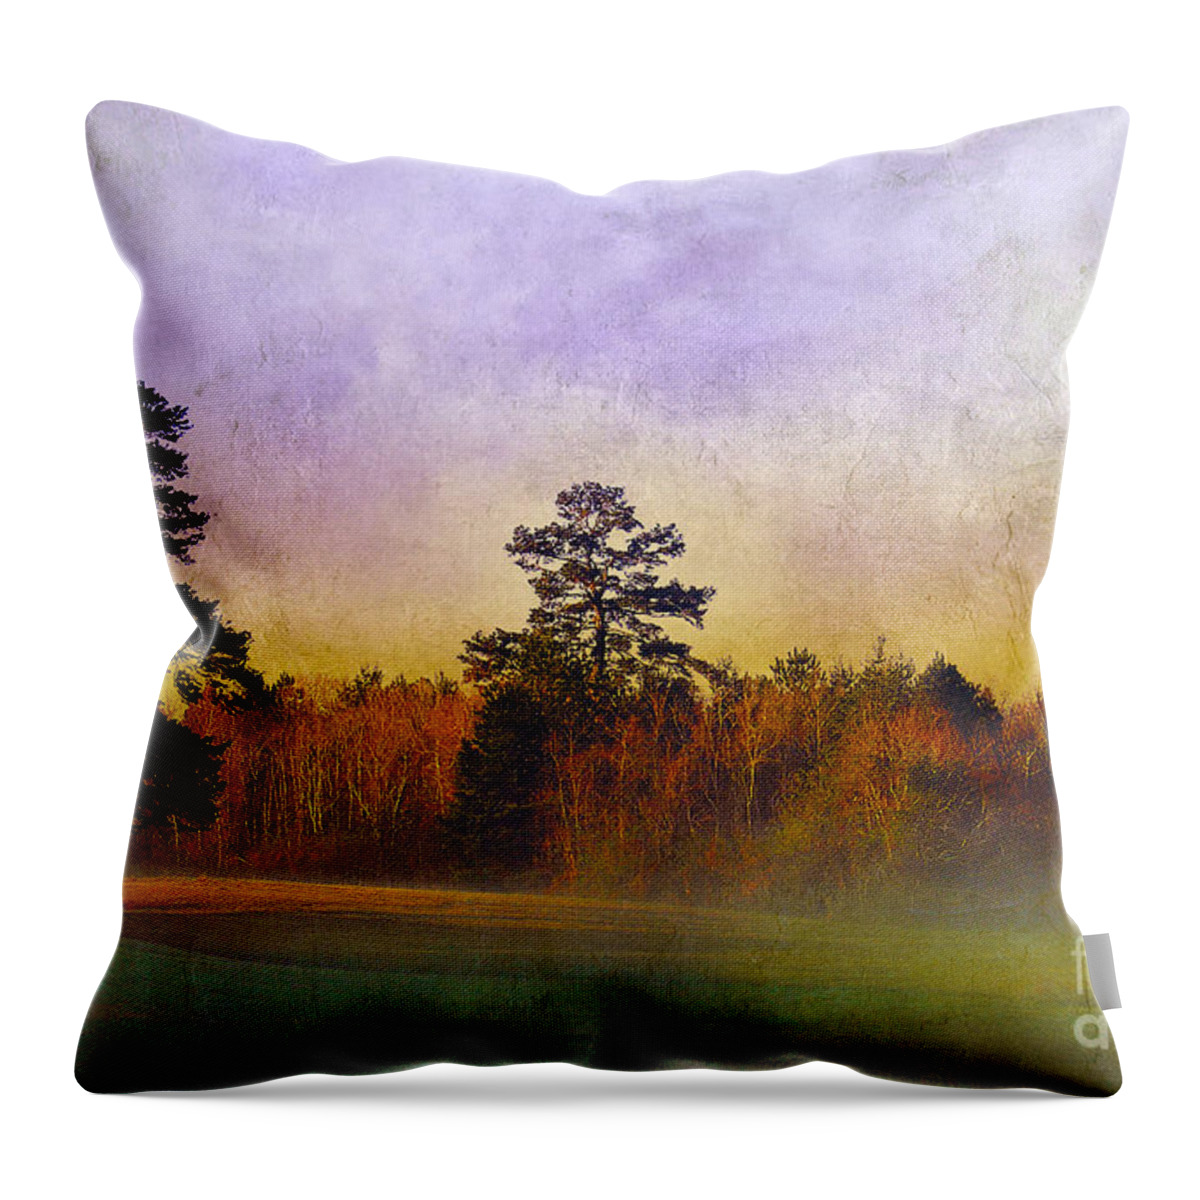 Mist Throw Pillow featuring the photograph Autumn Morning Mist by Judi Bagwell